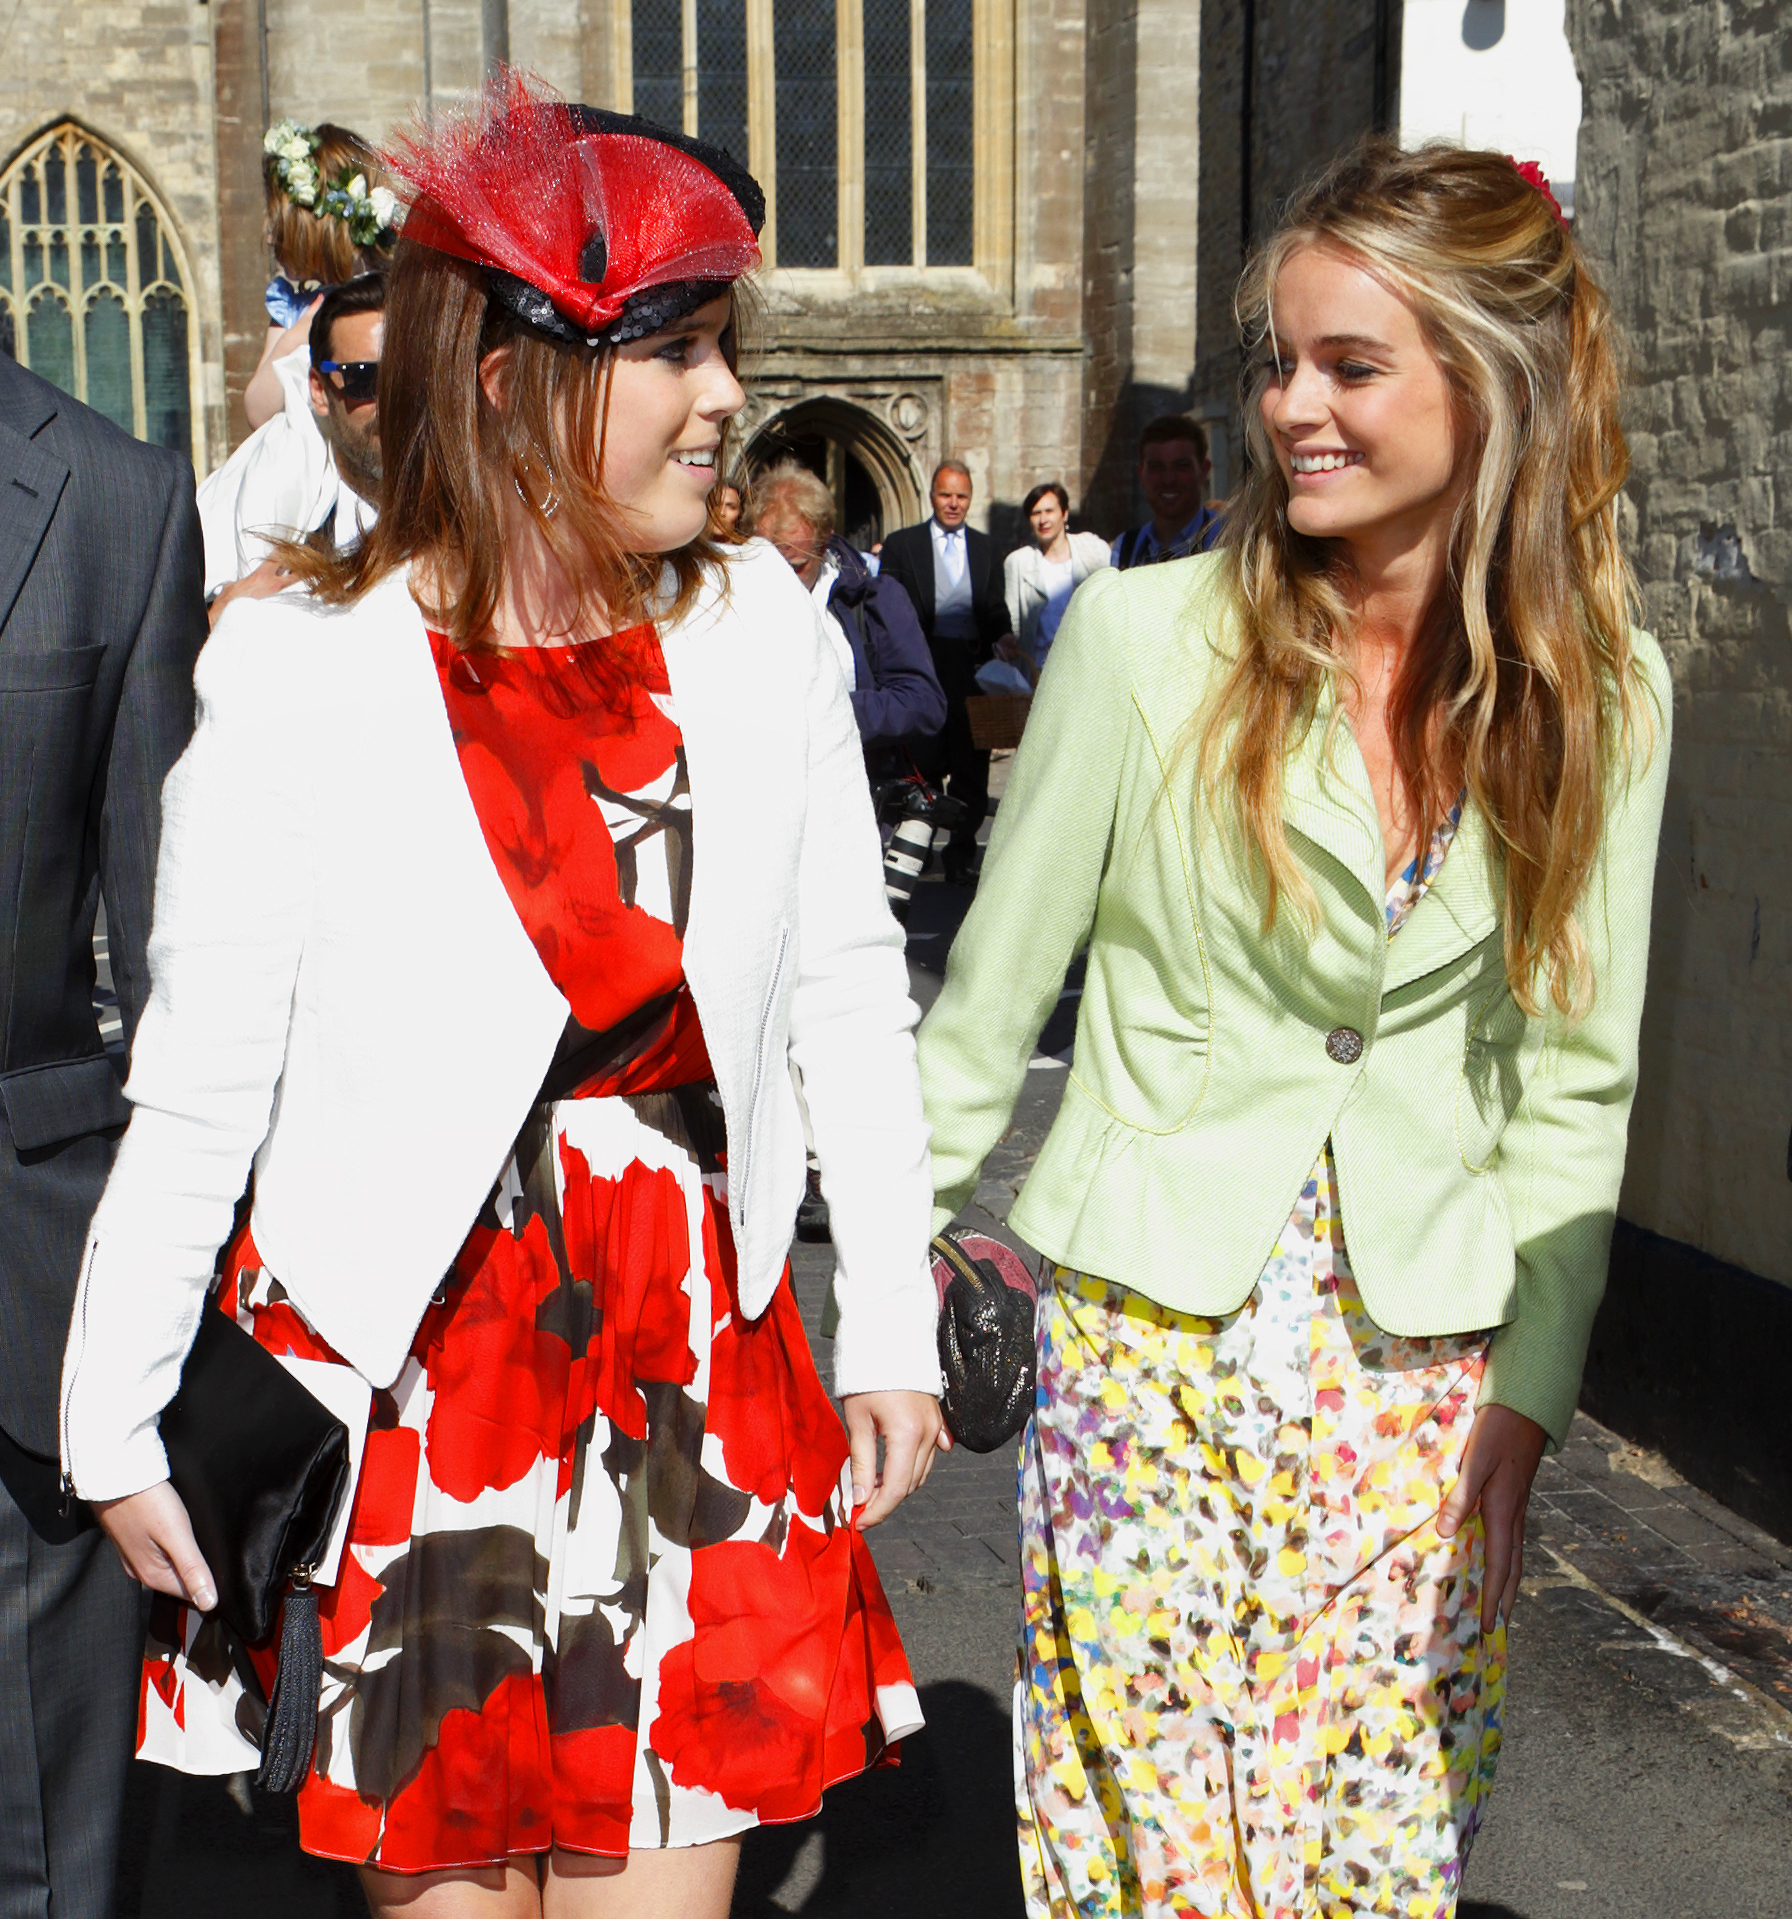 Princess Eugenie and Cressida Bonas attend the wedding of Lady Natasha Rufus Isaacs and Rupert Finch at the church of St John the Baptist on June 8, 2013 in Cirencester, England. | Source: Getty Images